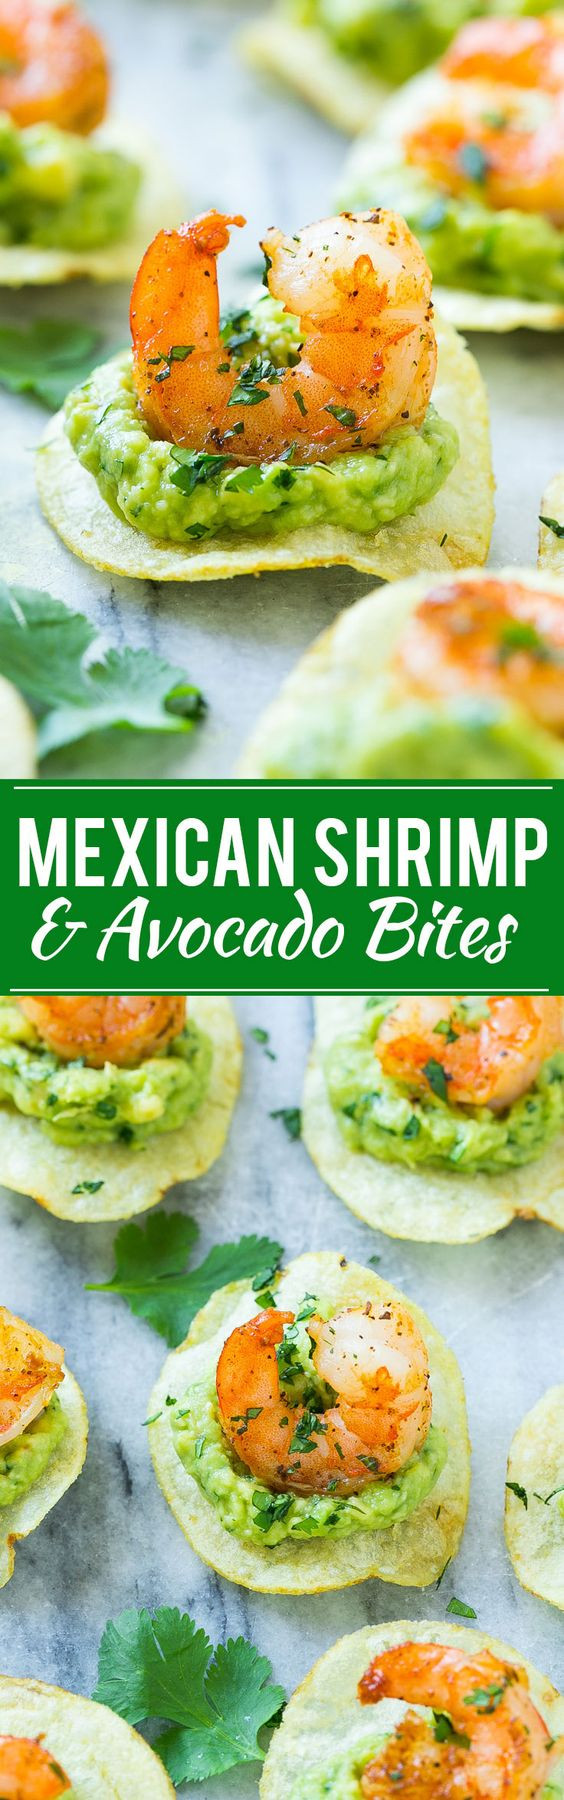 Mexican Appetizers For Party
 The Best Easy Party Appetizers Hors D’oeuvres Delicious